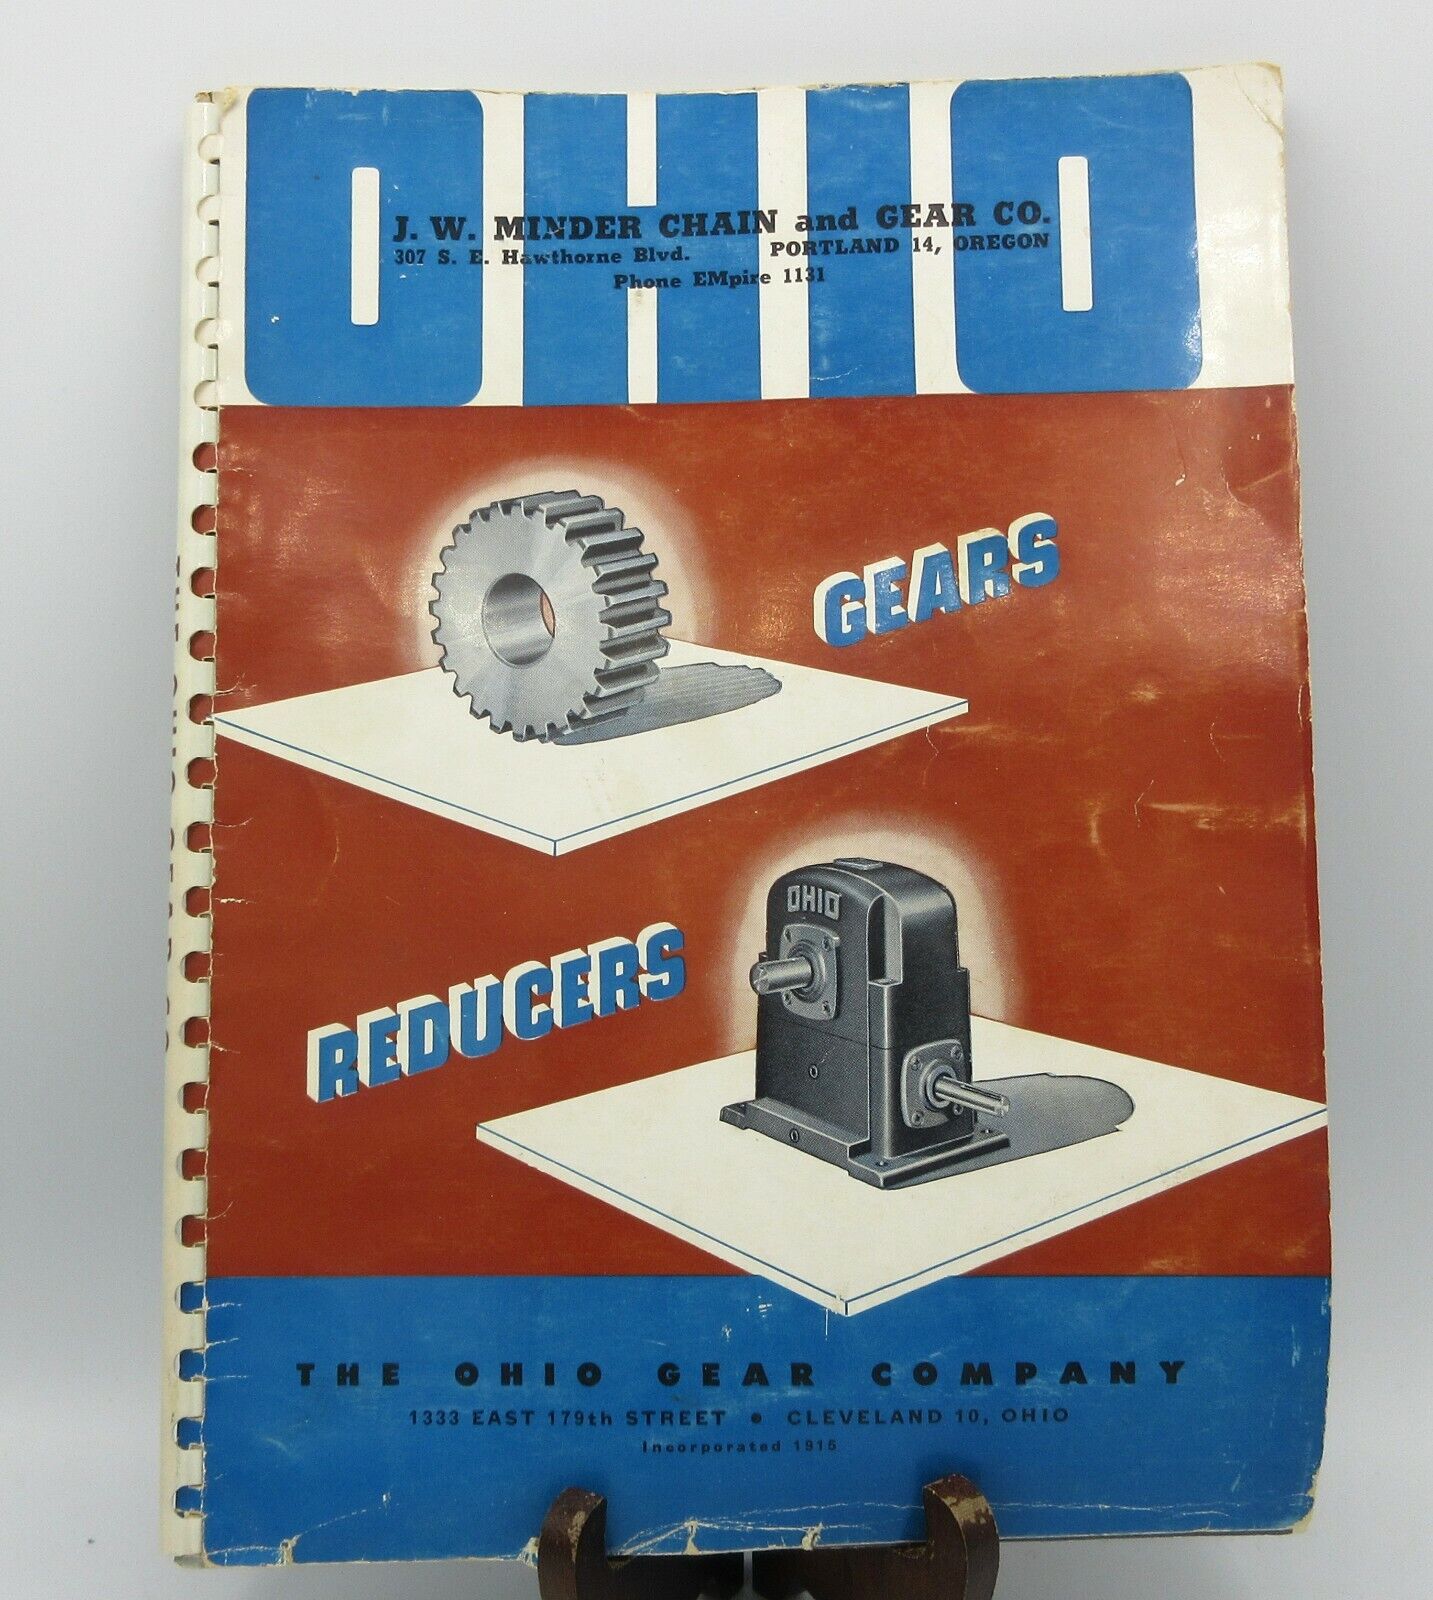 Vintage 1950's Ohio Gear Company Gears and Reducers Catalog Minder Chain Company